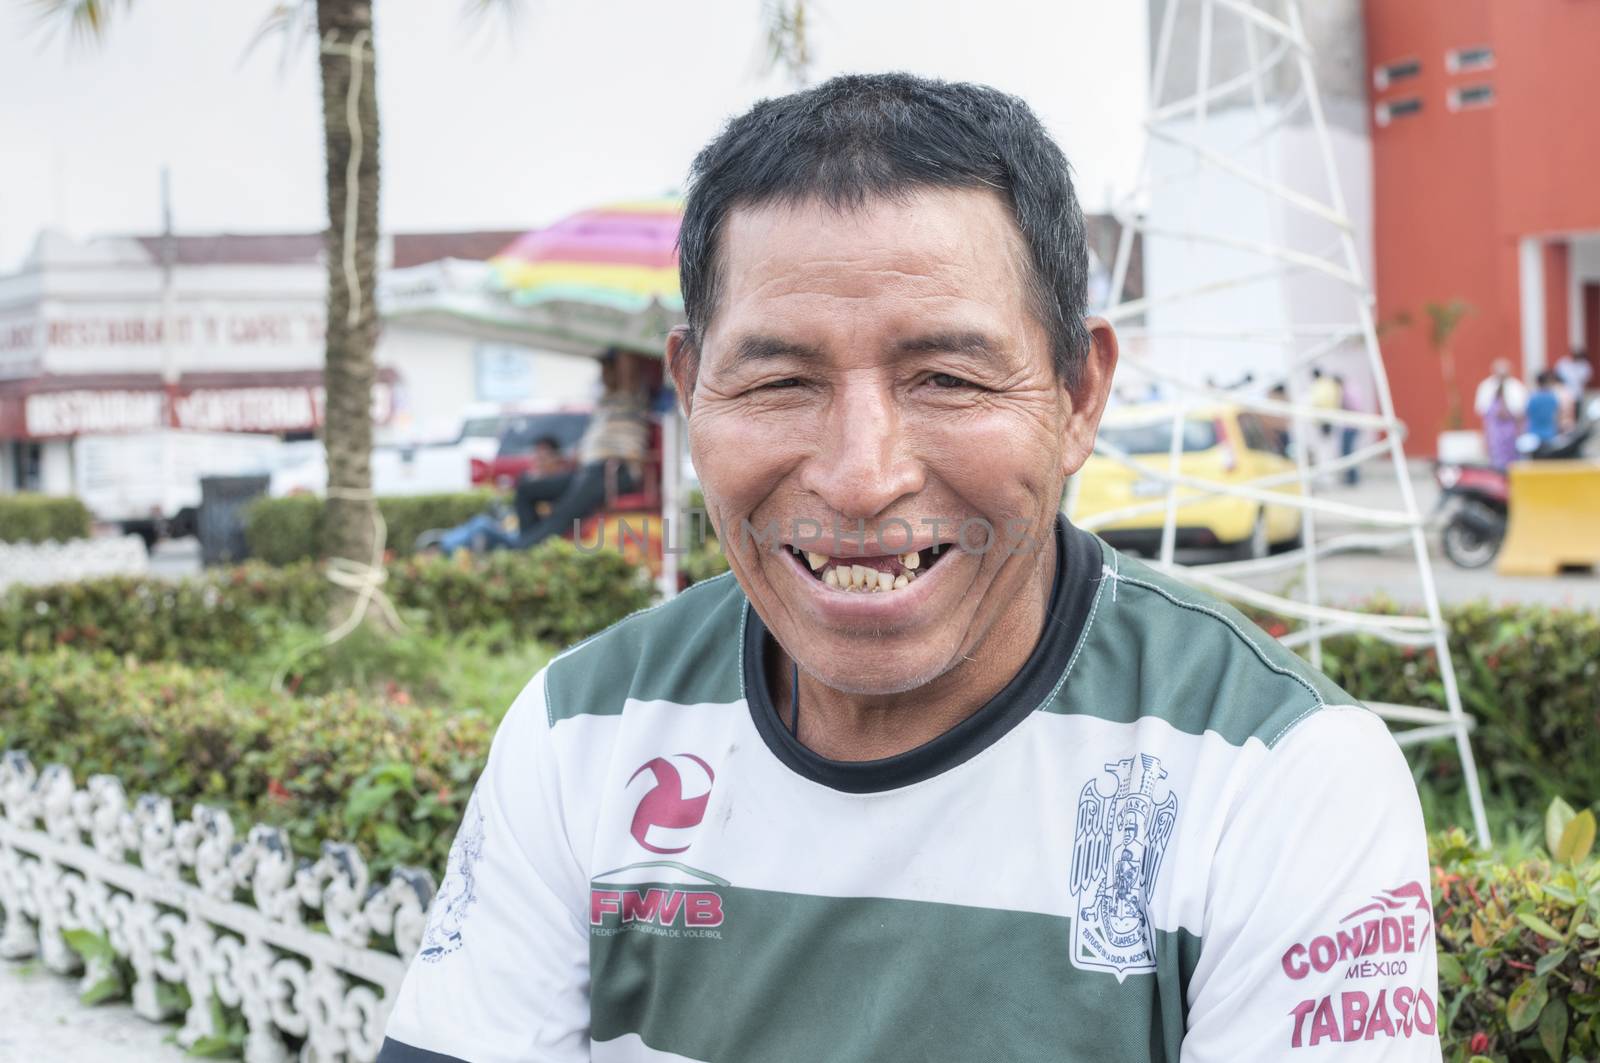 PICHUCALCO, MEXICO - DECEMBER 21, 2015: Tooth decay is a serious and common problem among the indiigenous populations in Mexico, as is evident in the smile of this indigenous man